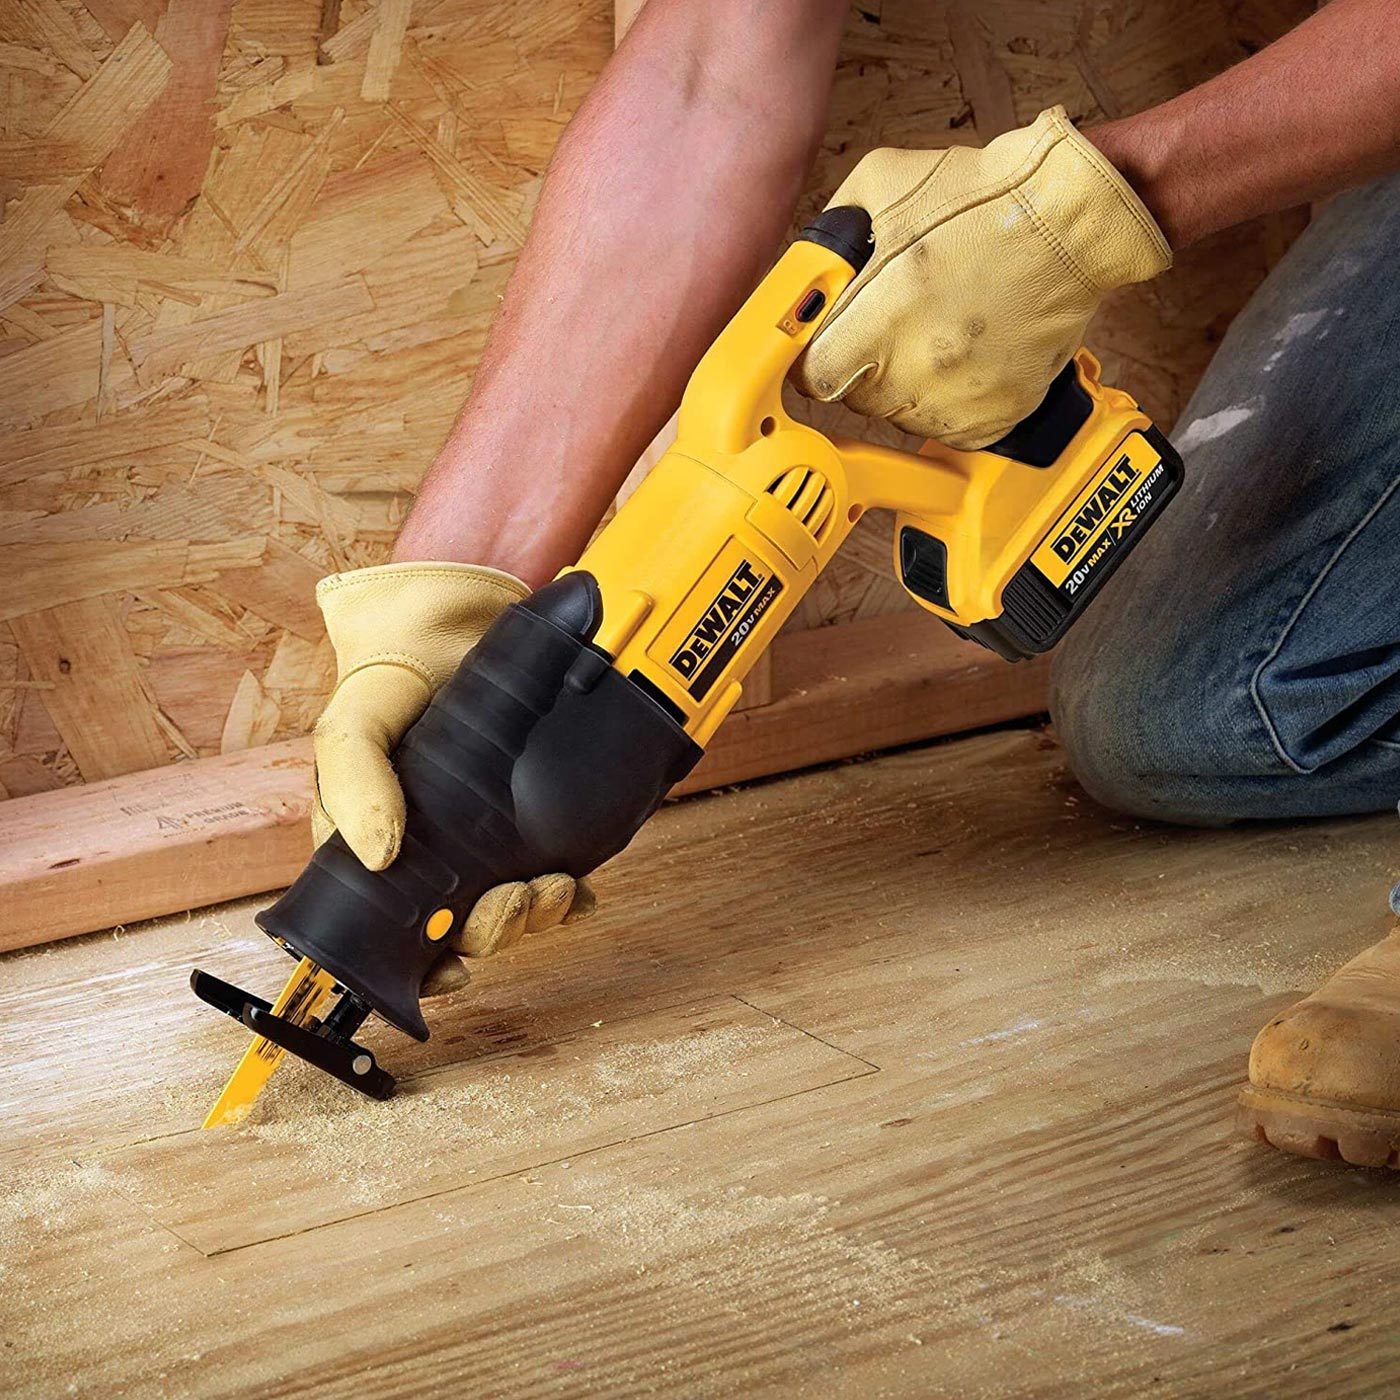 Amazon's Blowout DeWalt Tools Sale Has 20V Batteries for 60% Off—Here's What Else We're Buying